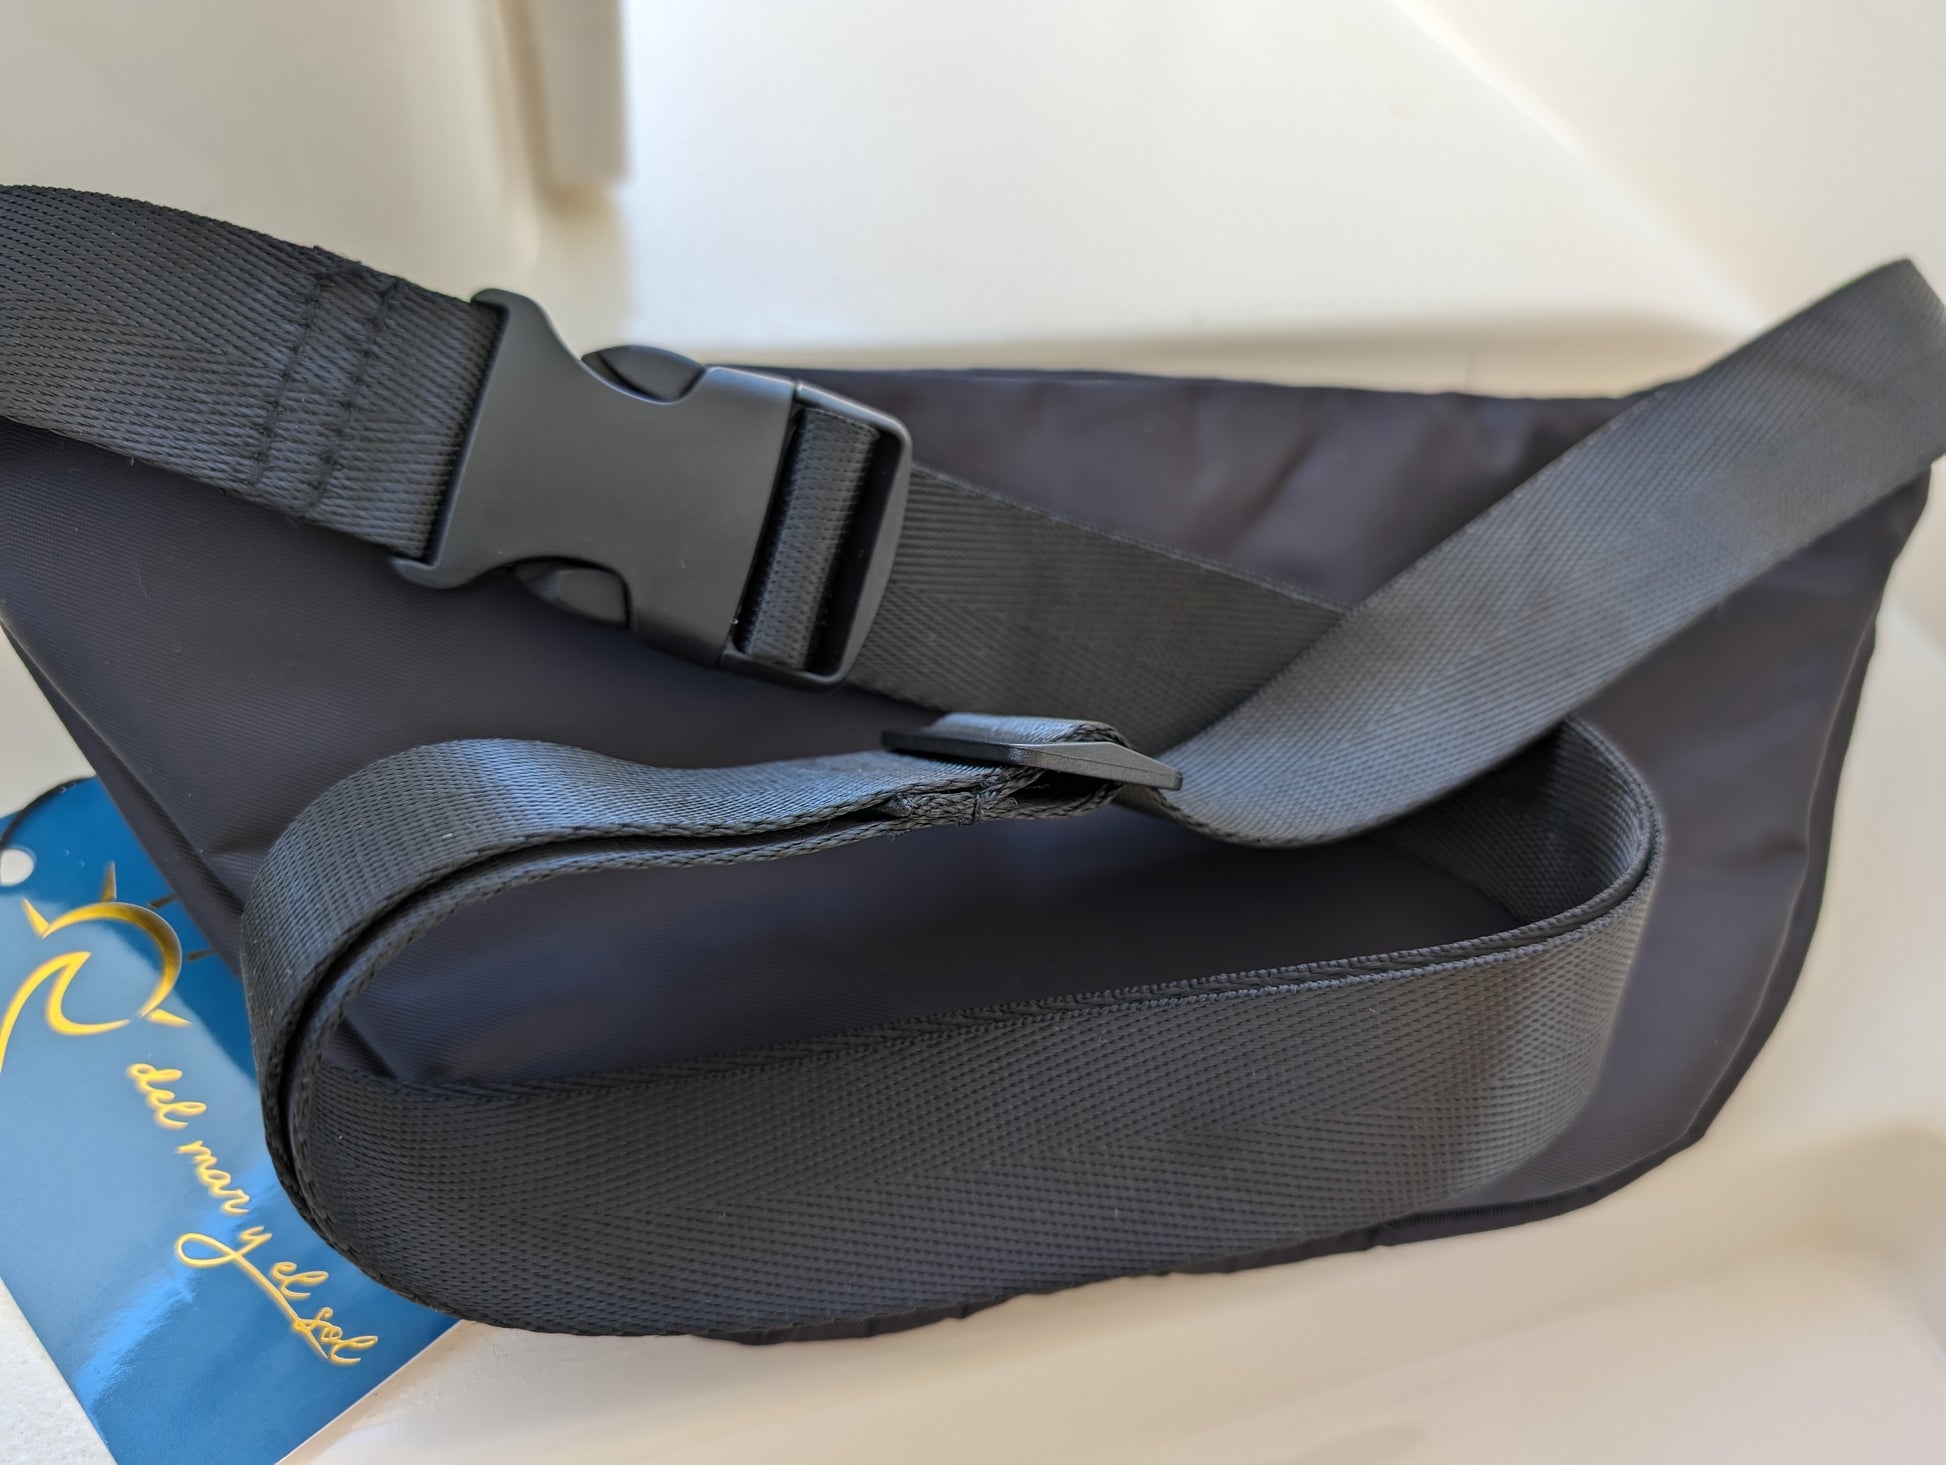 Close-up of the black fanny pack's adjustable strap and buckle detail.